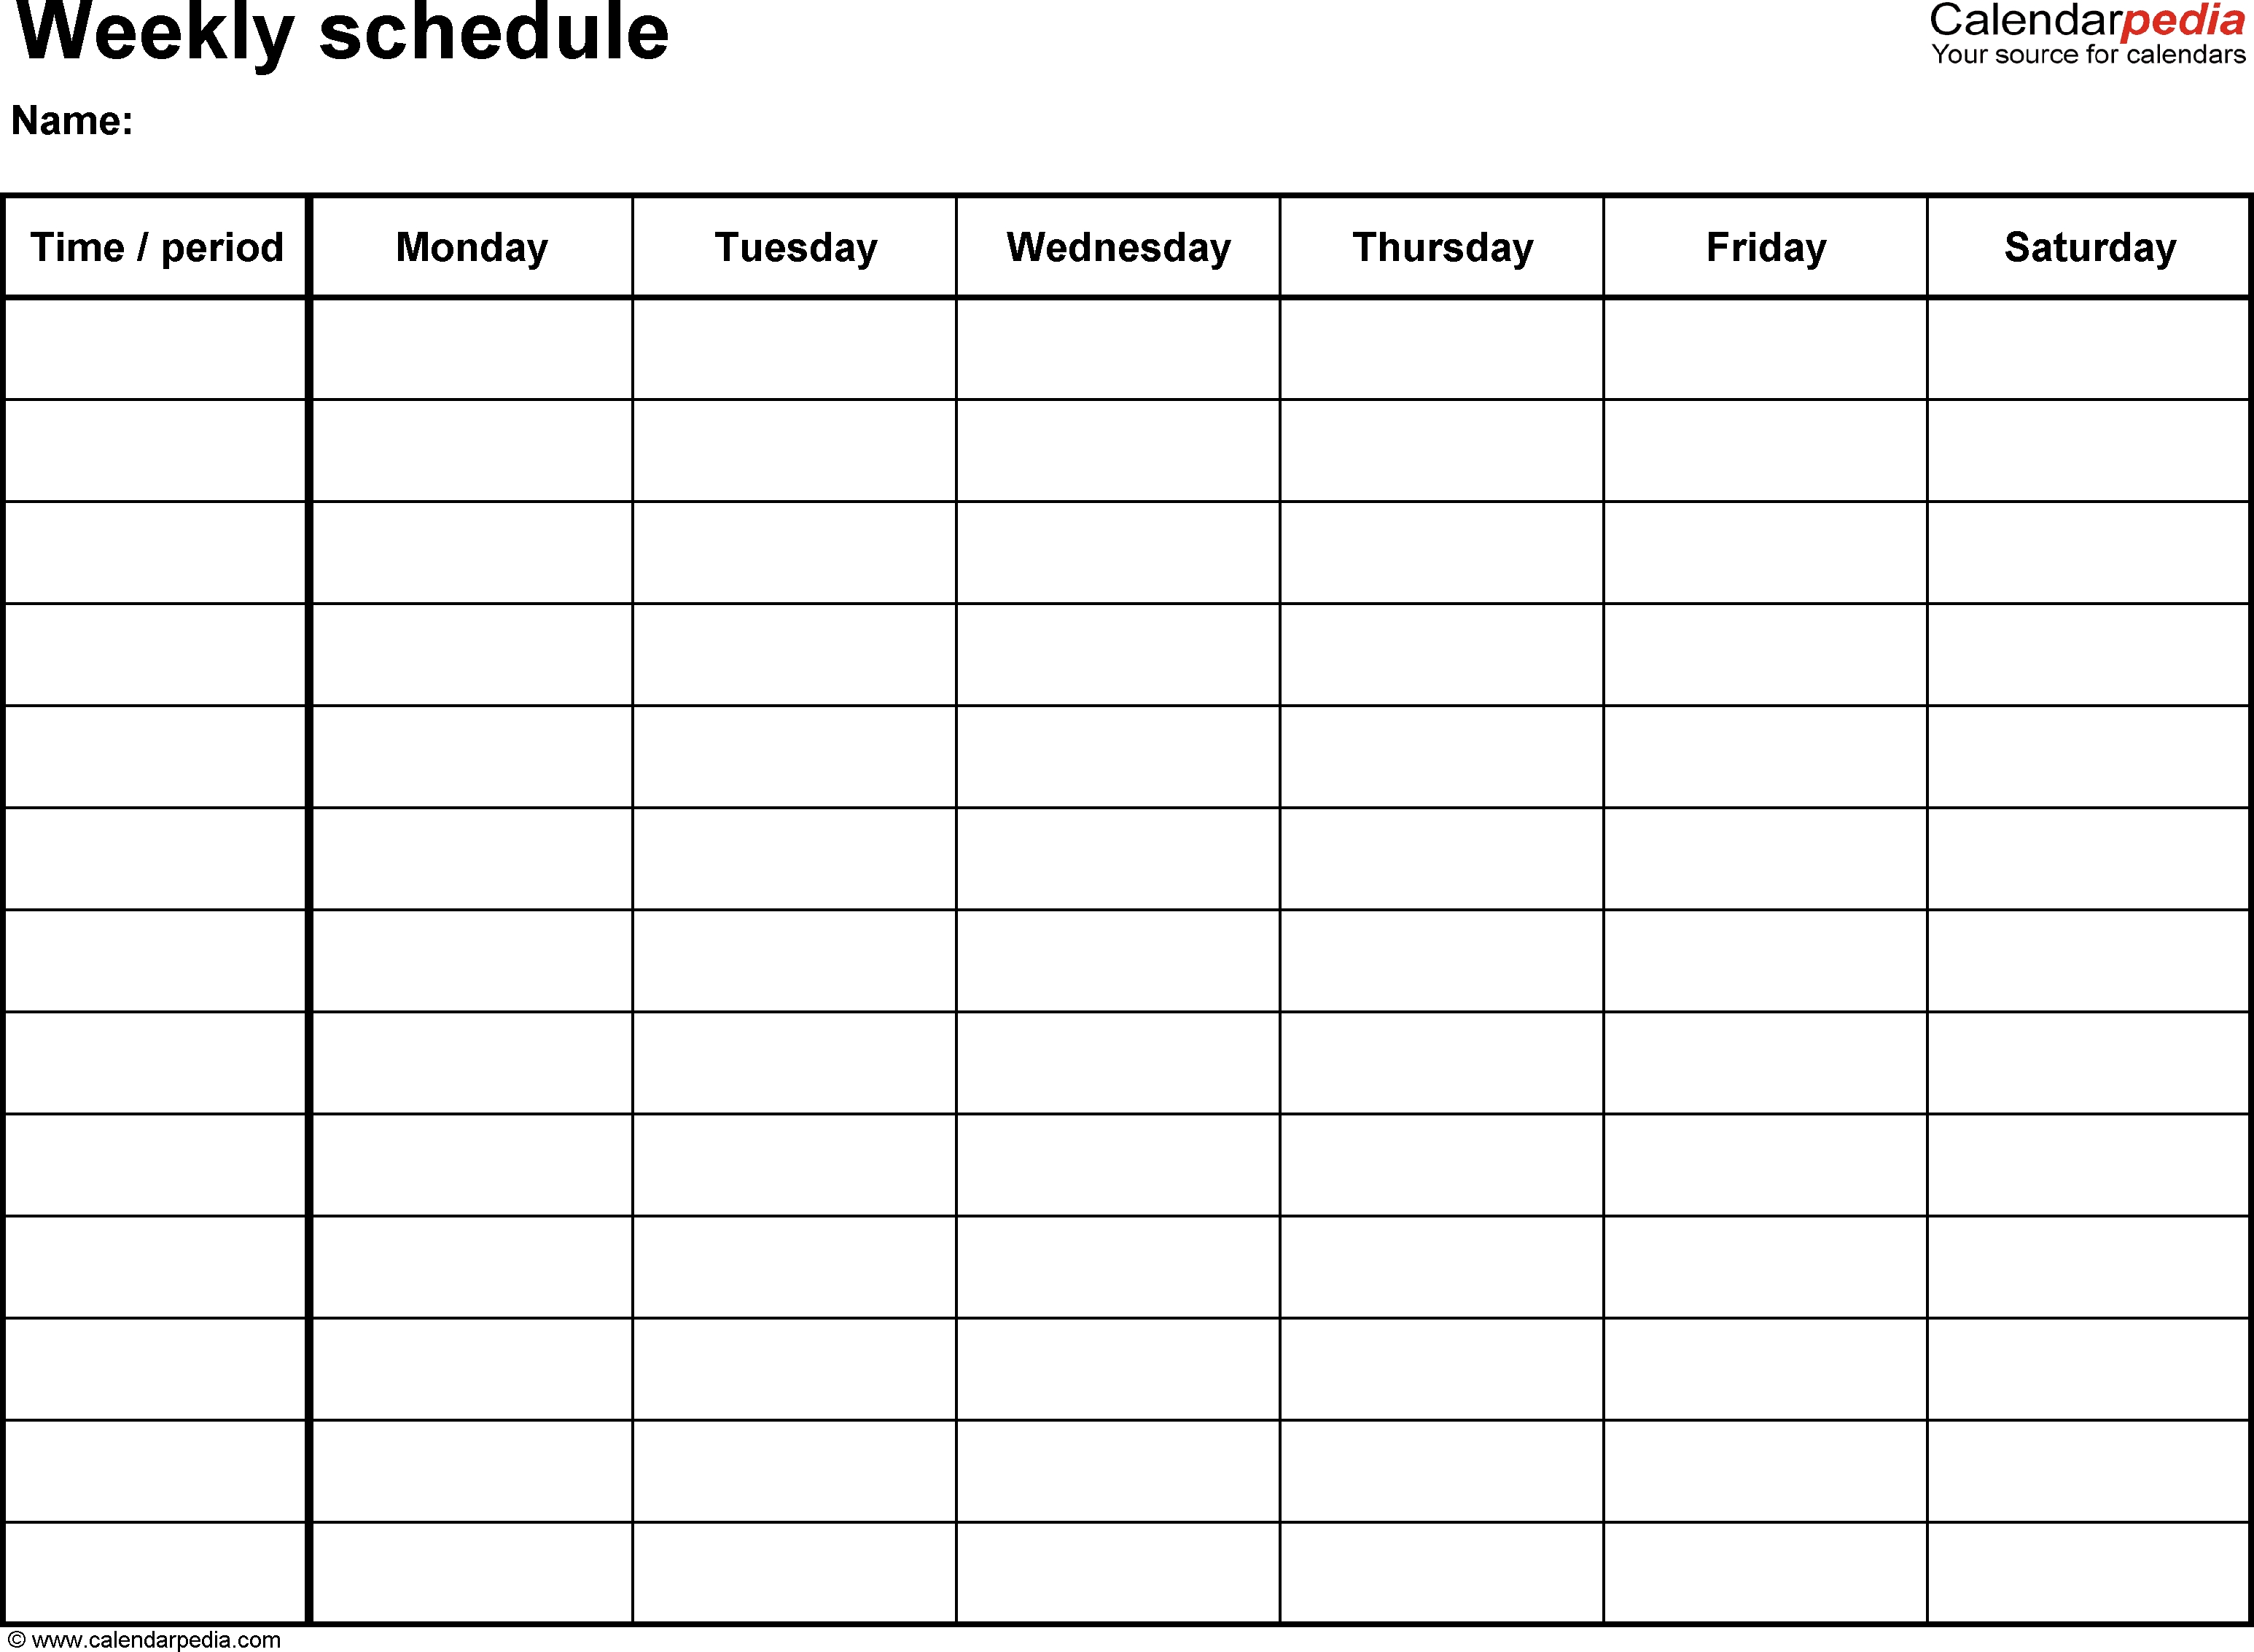 Free Weekly Schedule Templates For Word - 18 Templates with To Fill In Blank Calendar